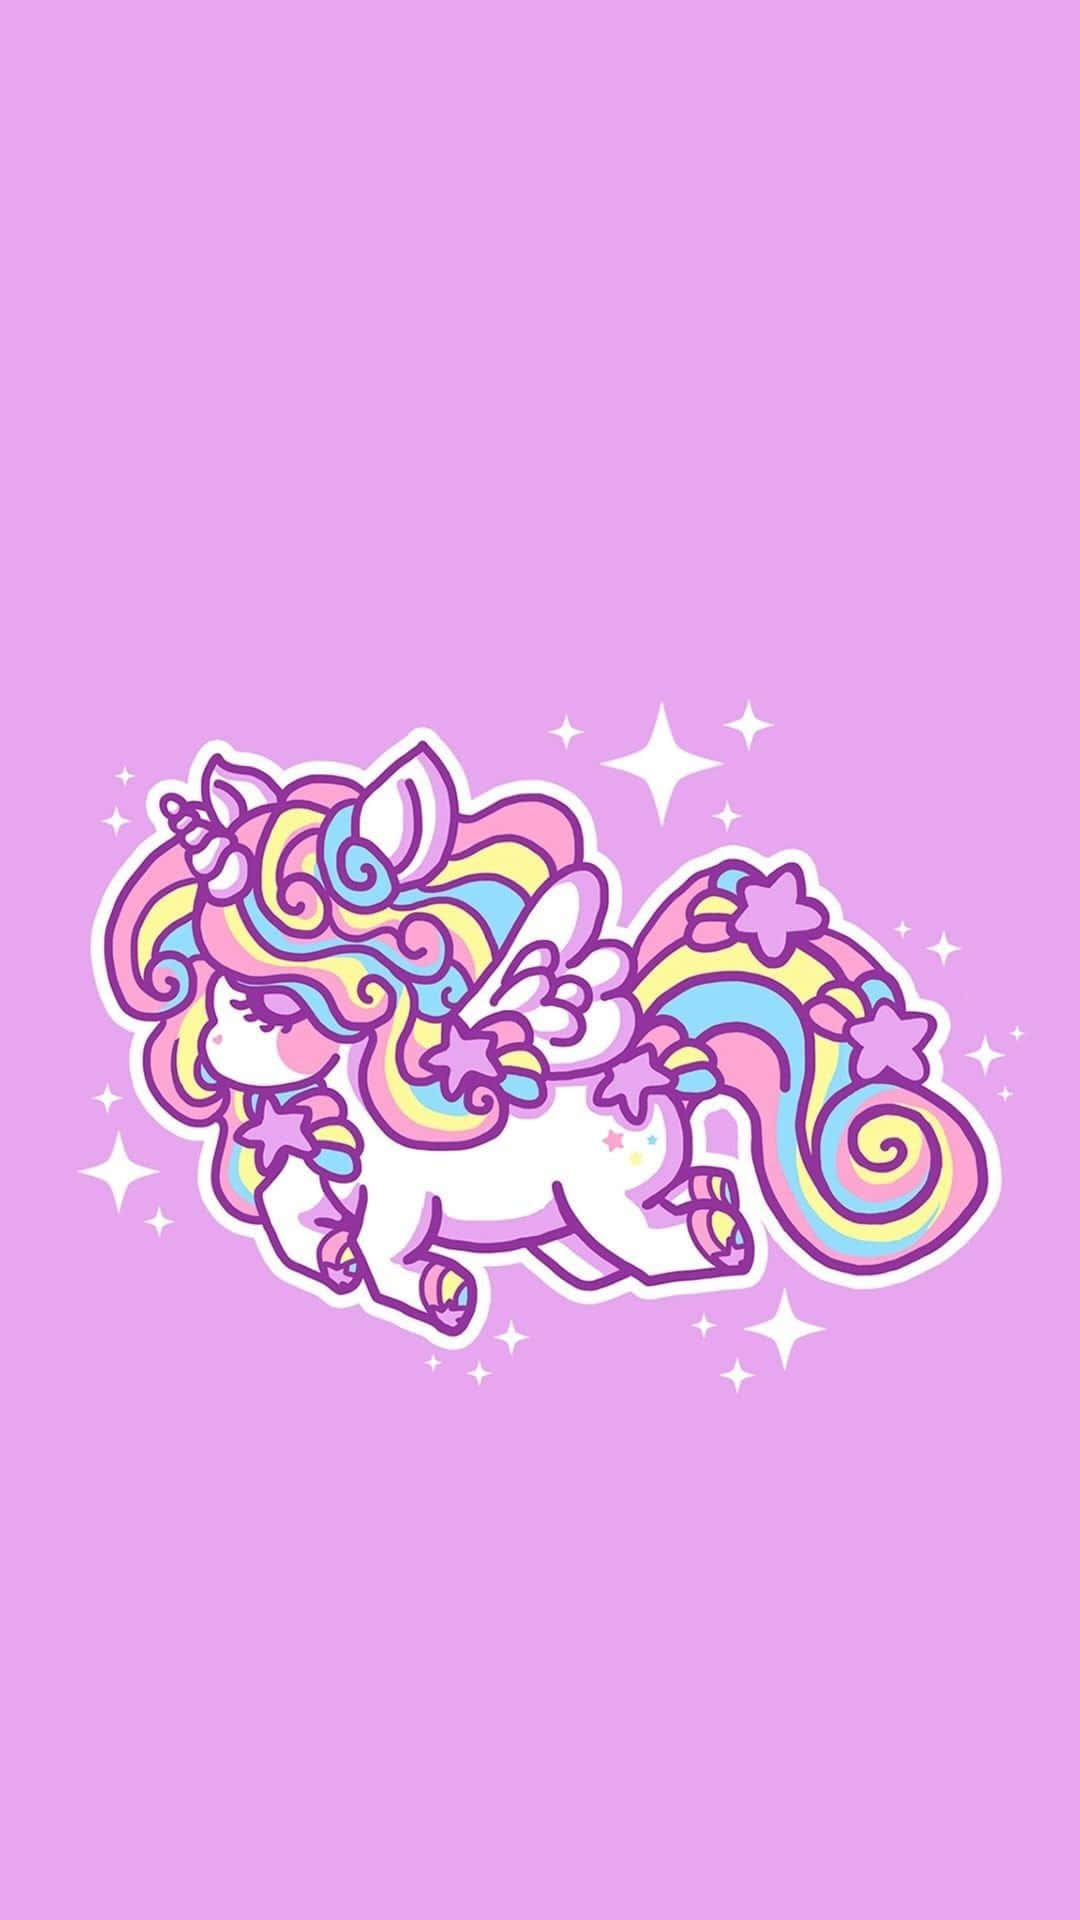 A vibrant and cute kawaii rainbow illustration perfect for adding a pop of colour to any device Wallpaper